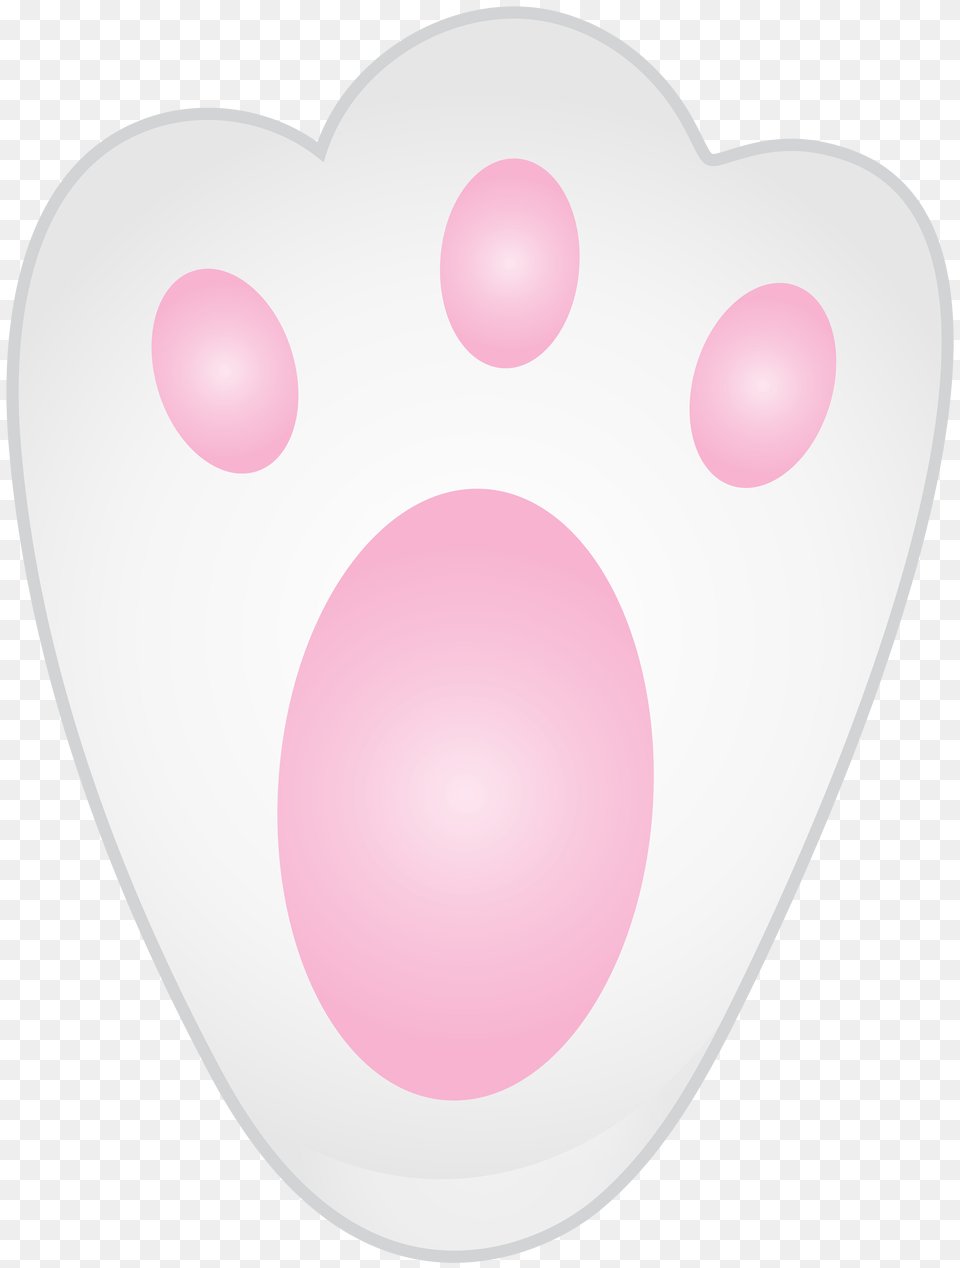 Bunny Paw Clip Art, Balloon Png Image